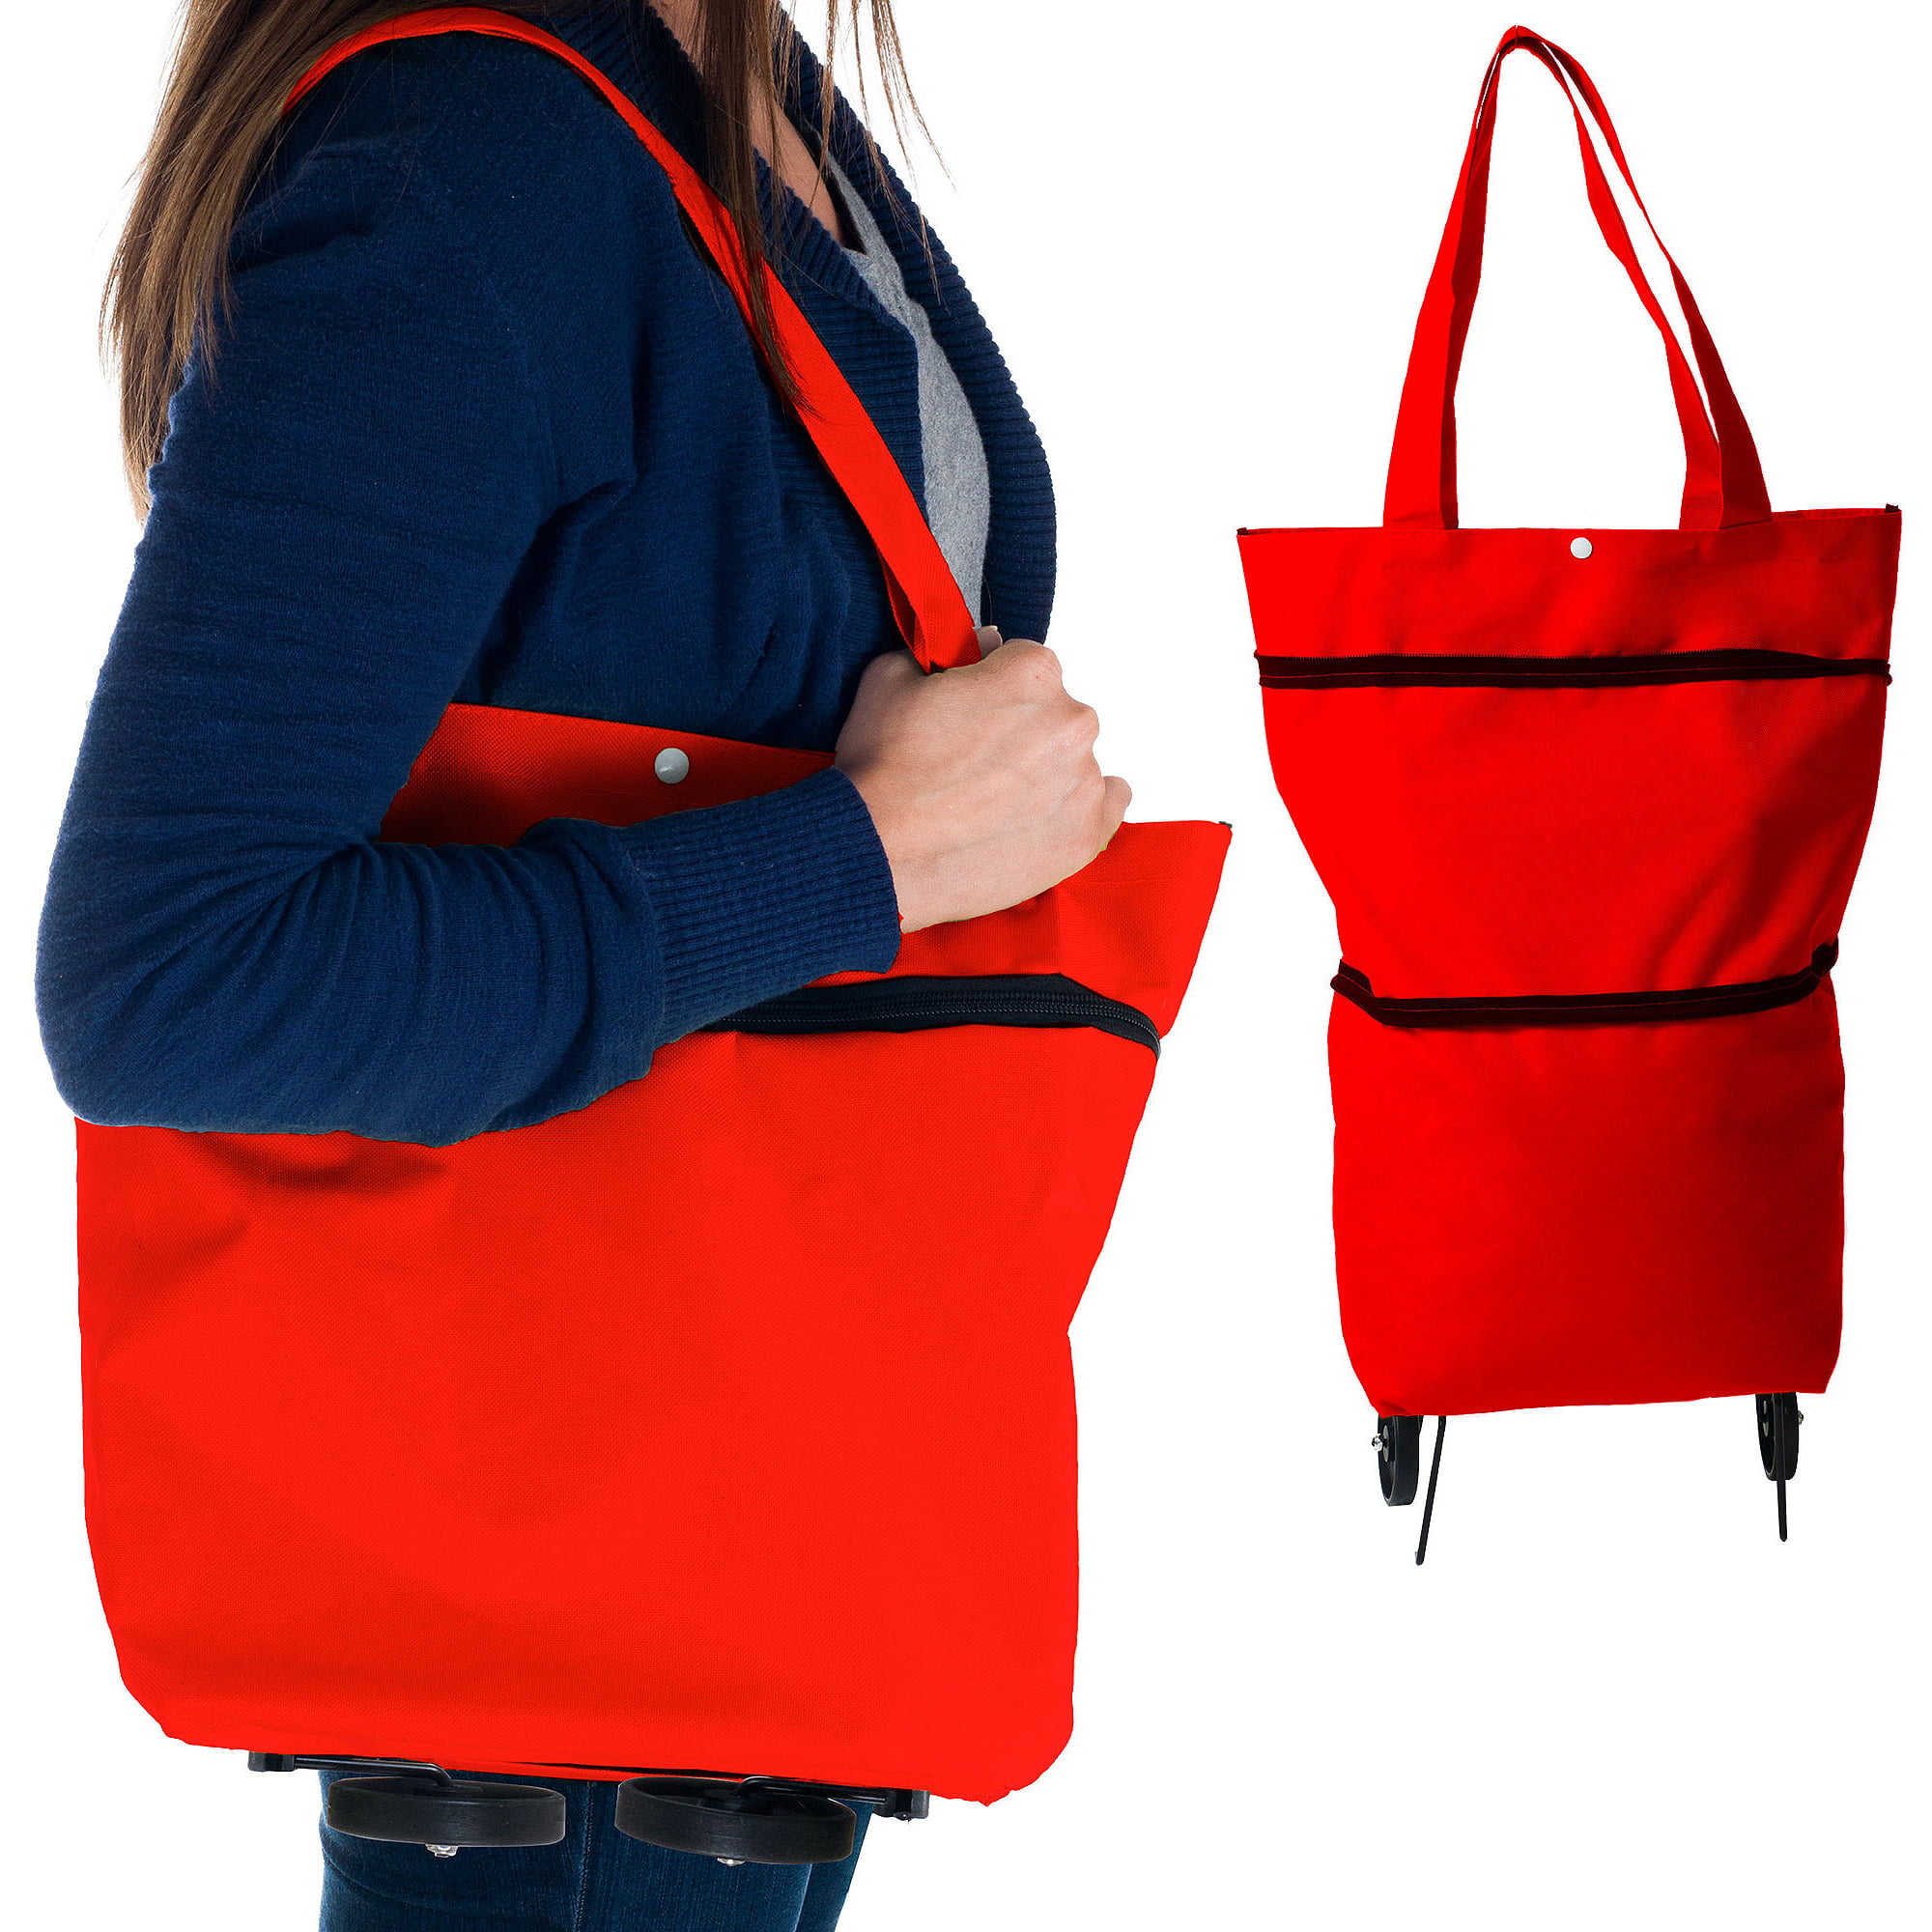 tote bag with pockets sewing pattern